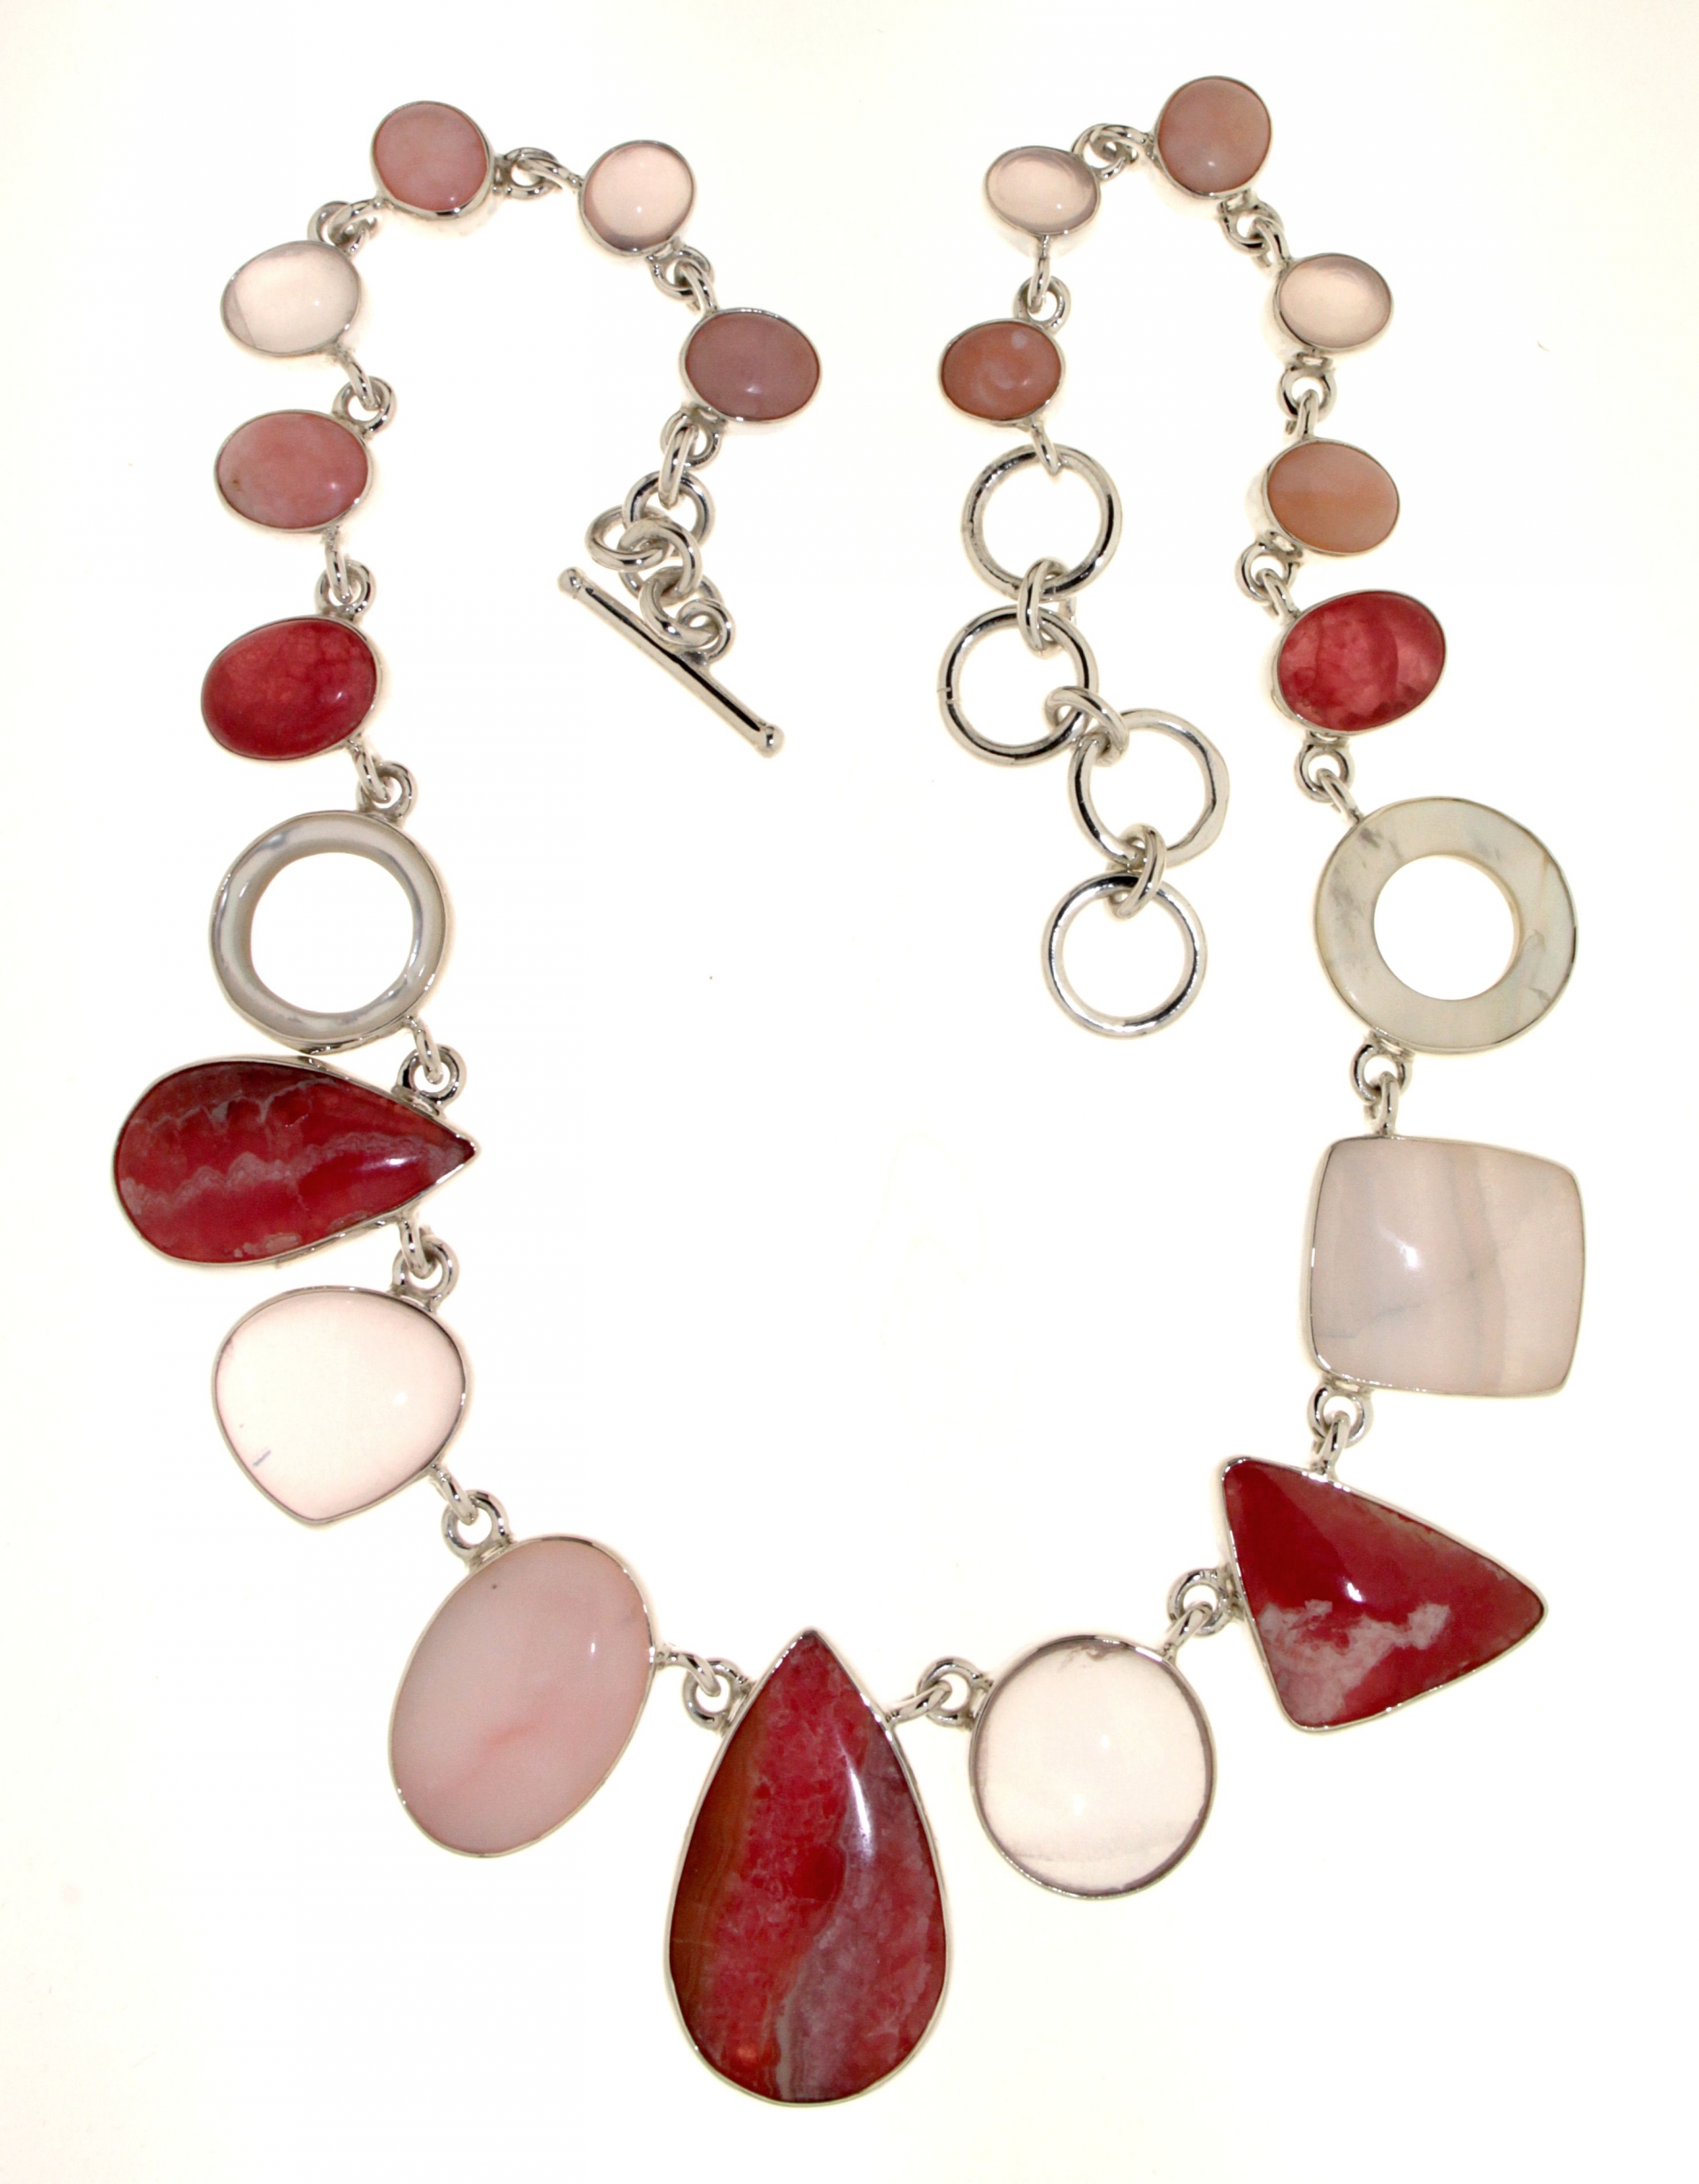 Necklace in 925 Silver with Rhodochrosite